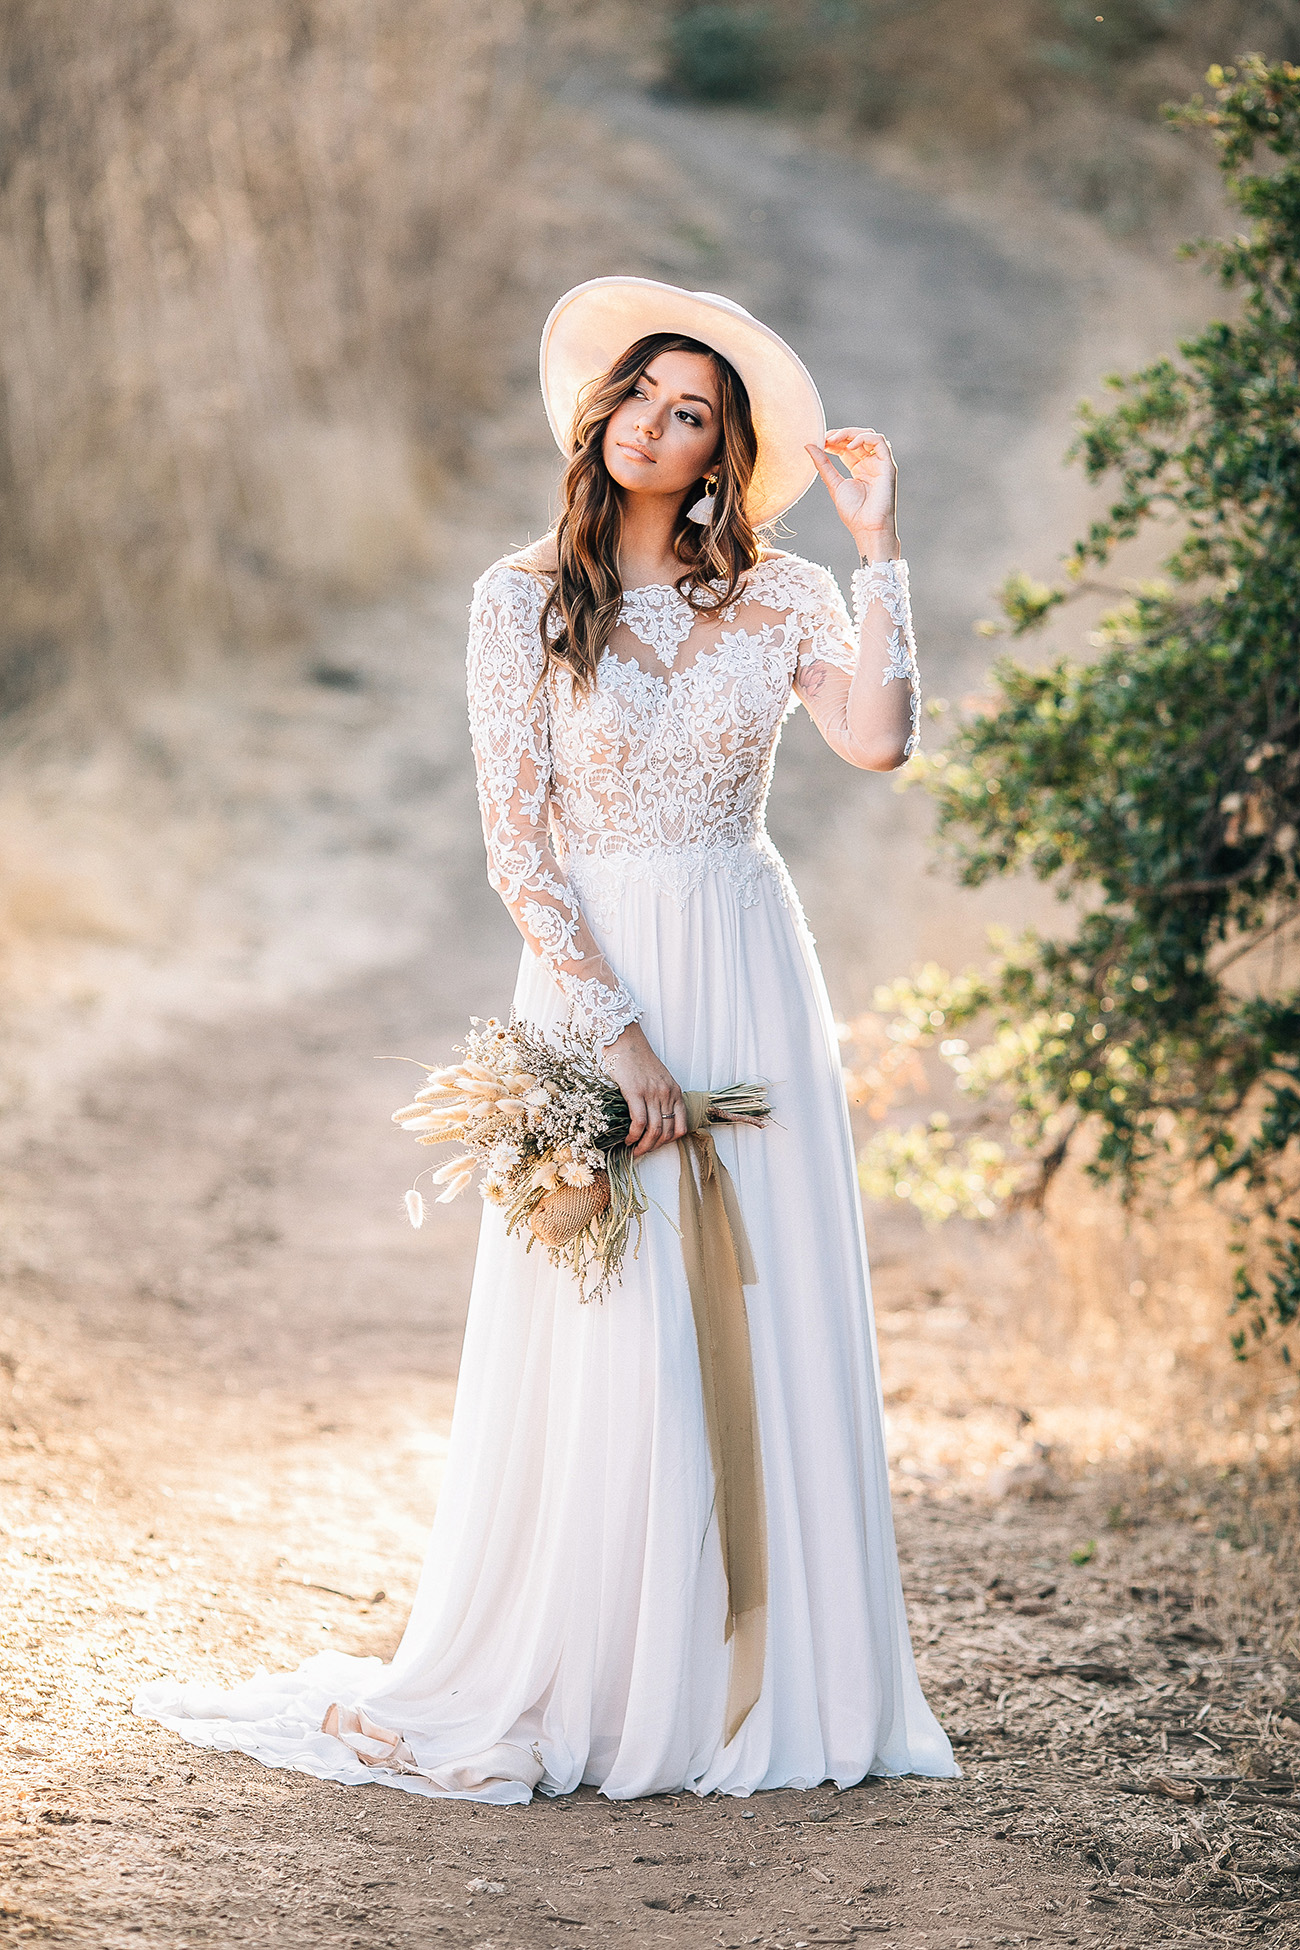 Our Top 4 Boho Wedding Dress Picks from Maggie Sottero